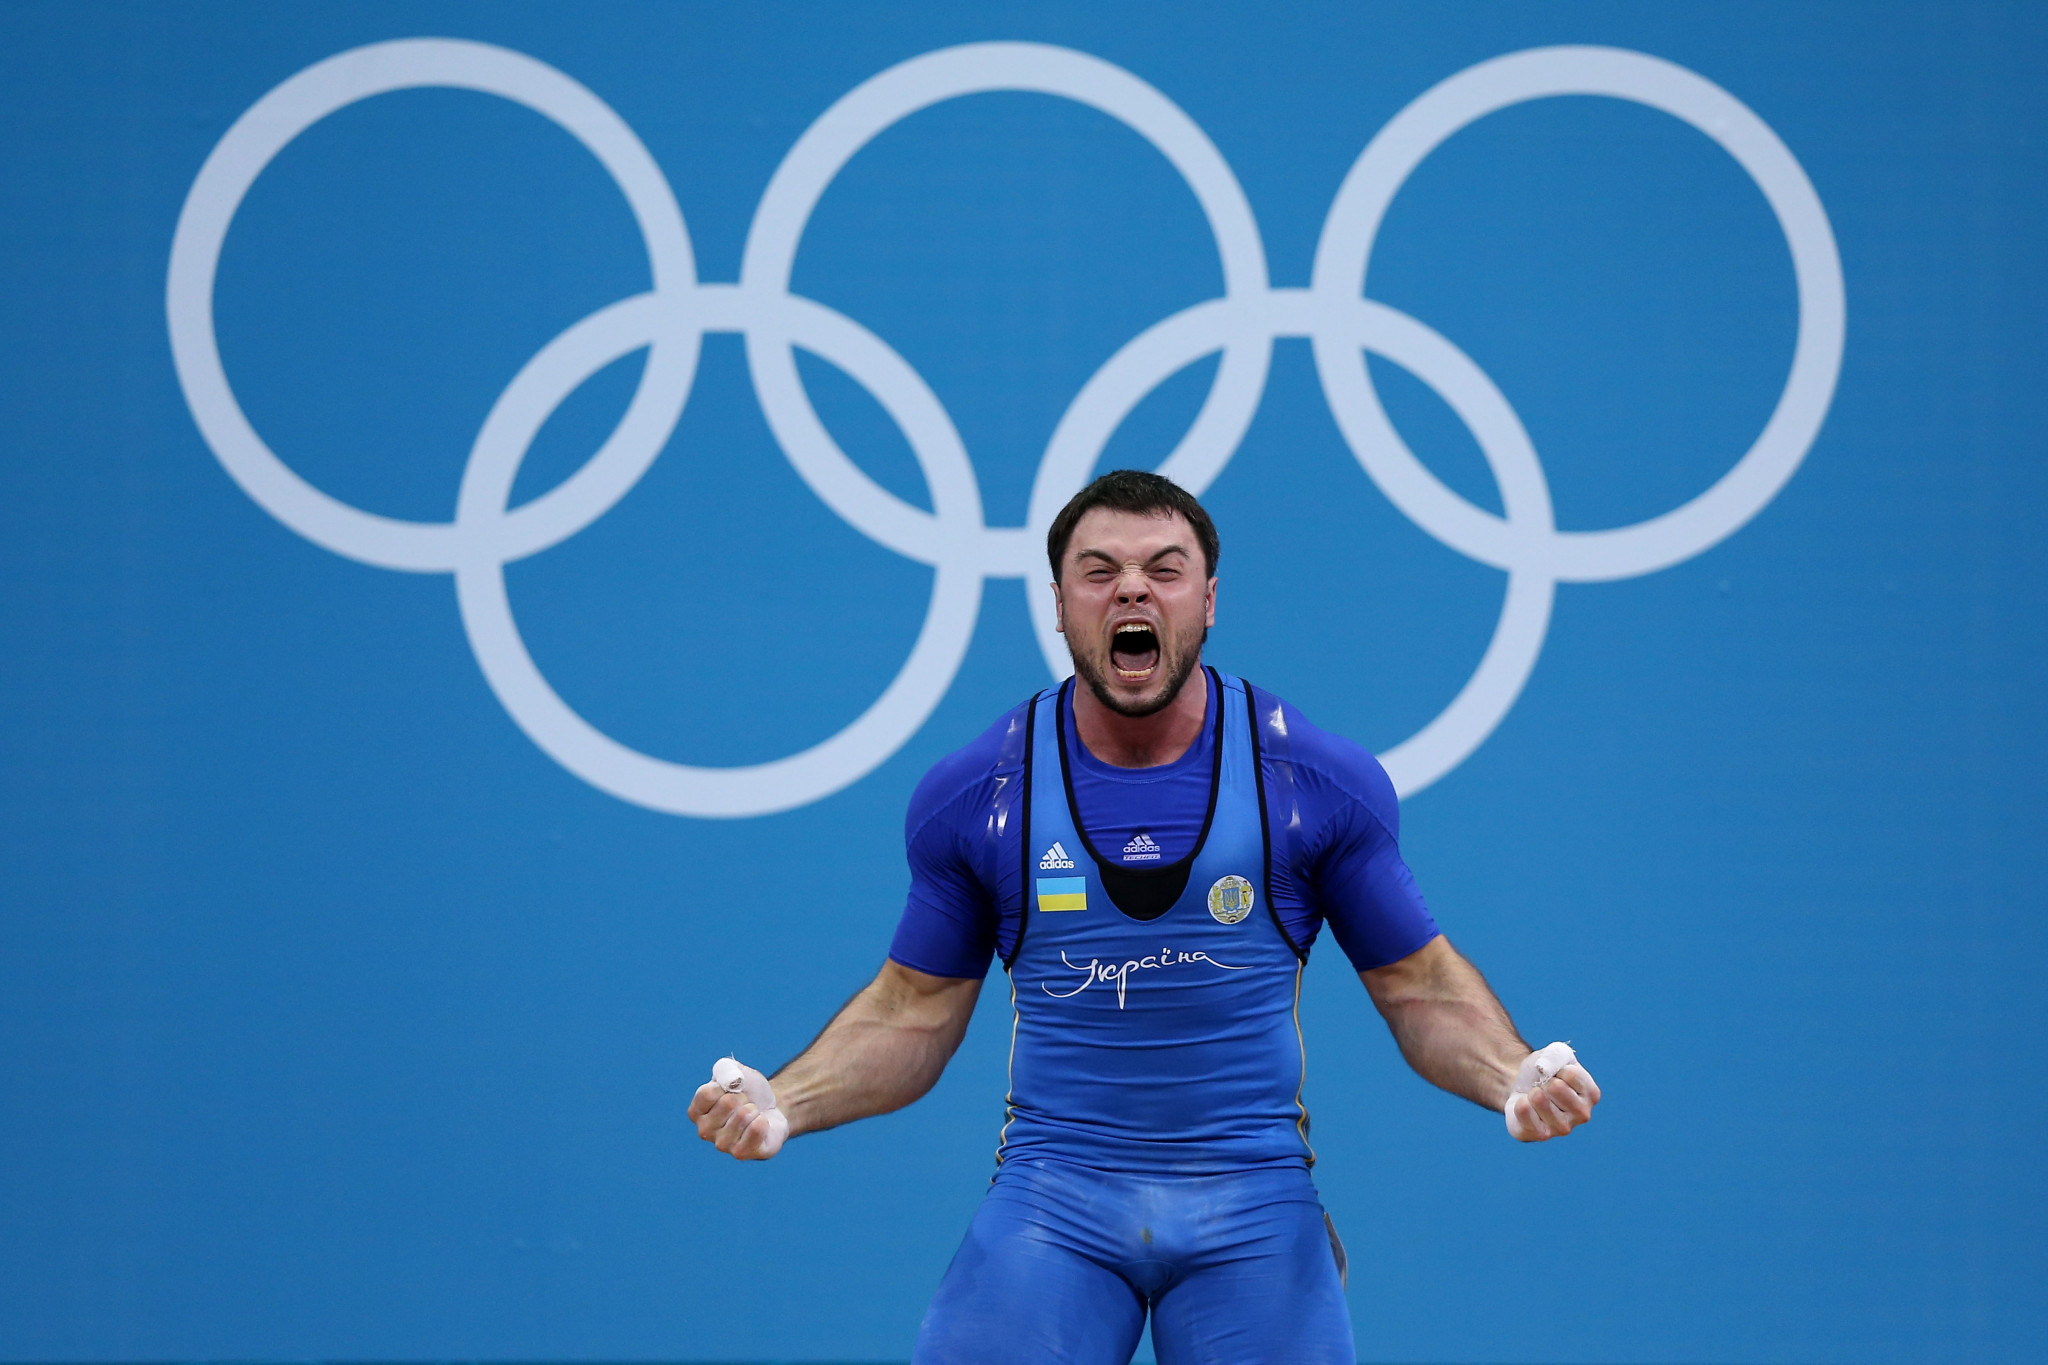 Oleksiy Torokhtiy has been stripped of his Olympic title ©Getty Images